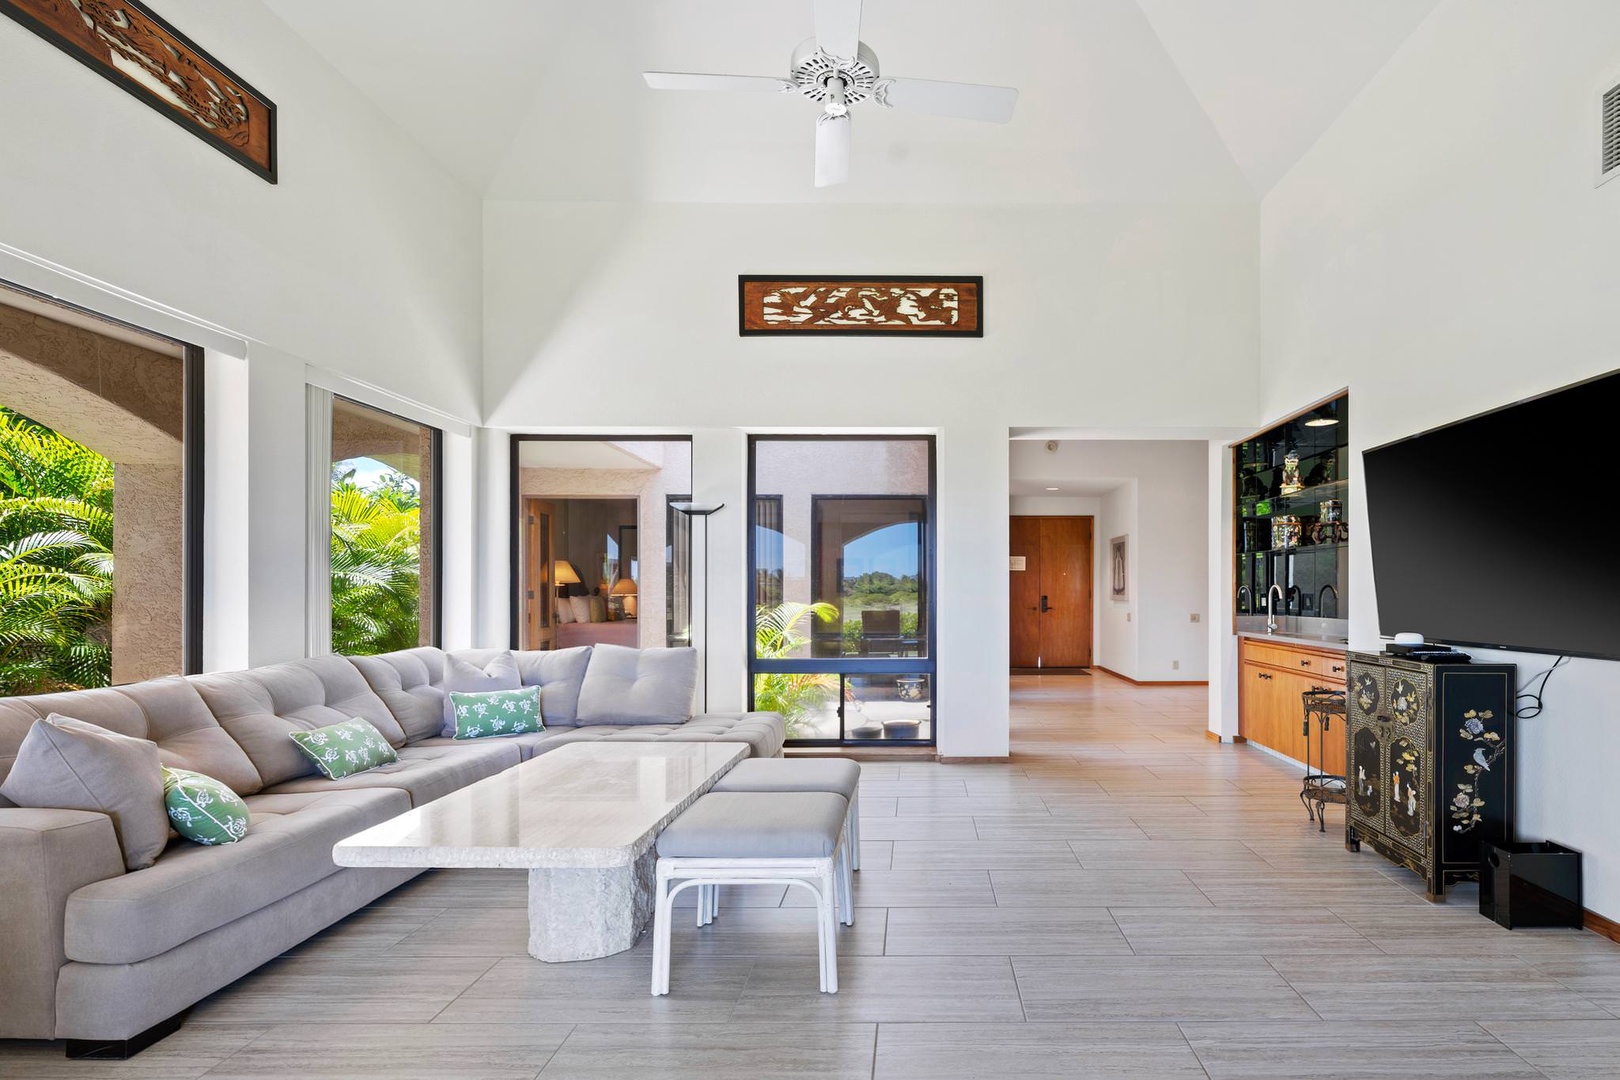 Spacious living room with 75" Smart HDTV, golf course view and lanai access